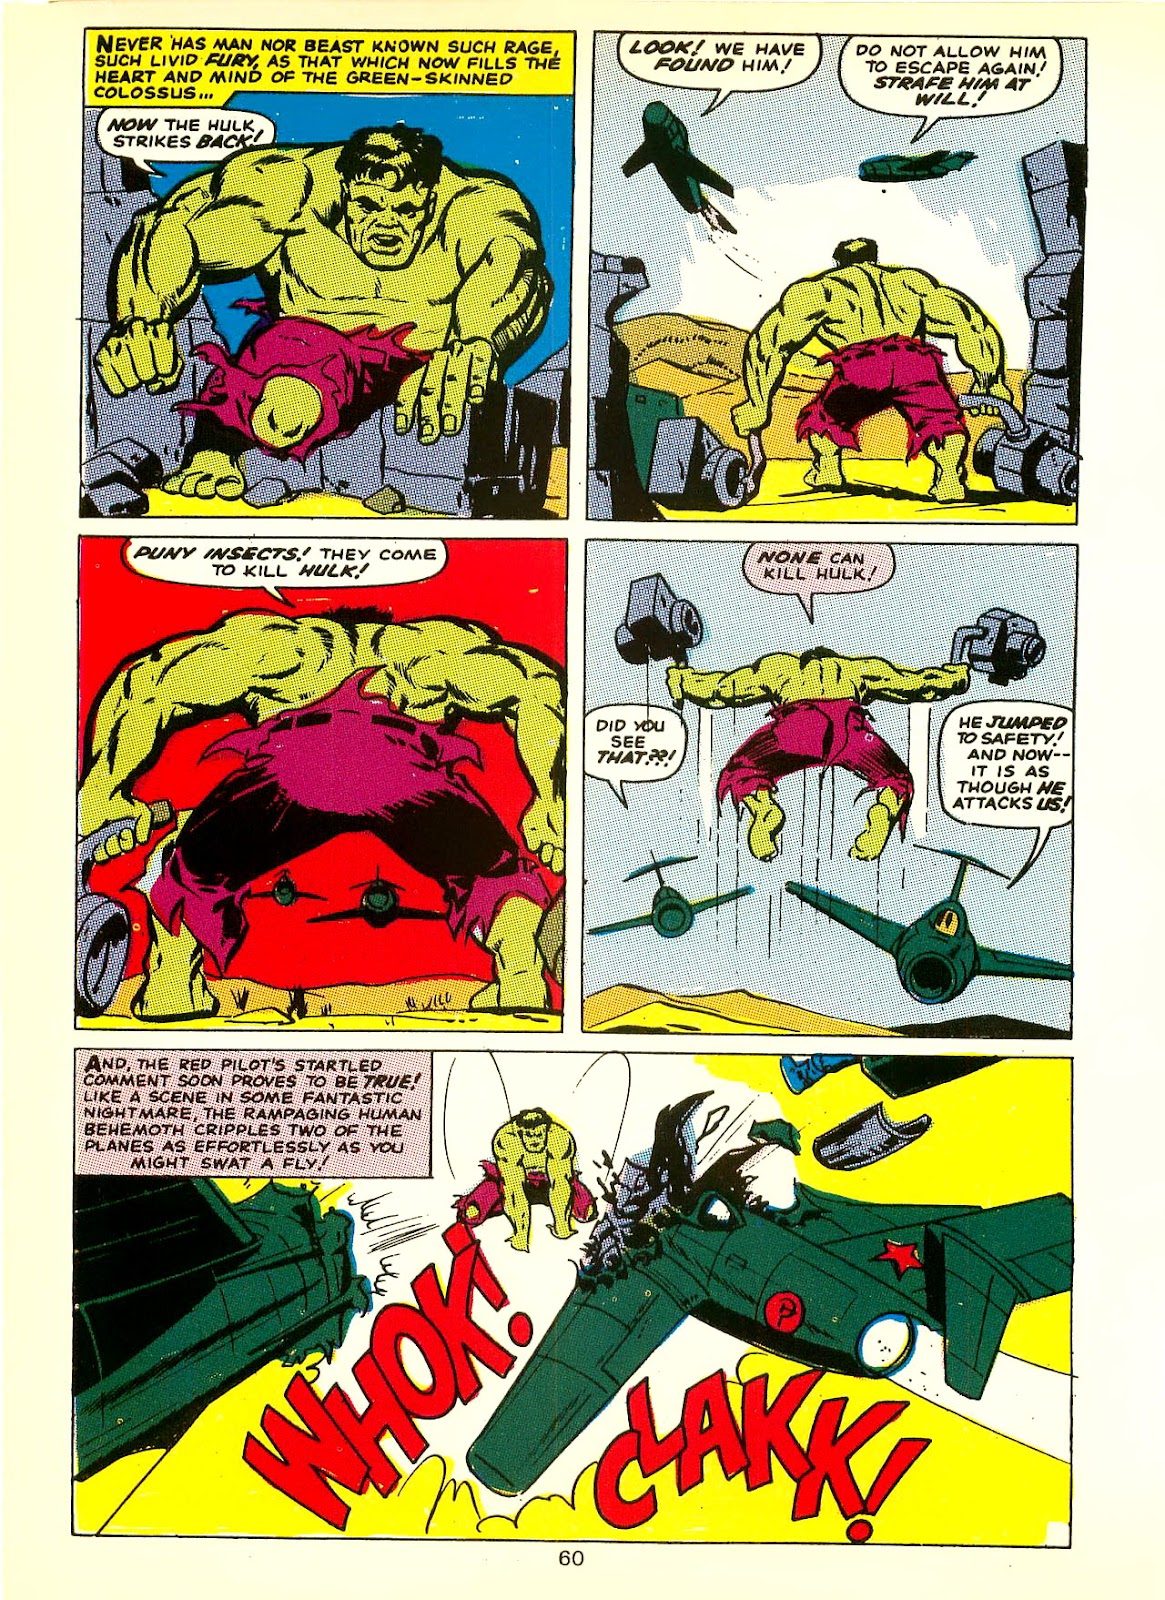 Incredible Hulk Annual issue 1978 - Page 60